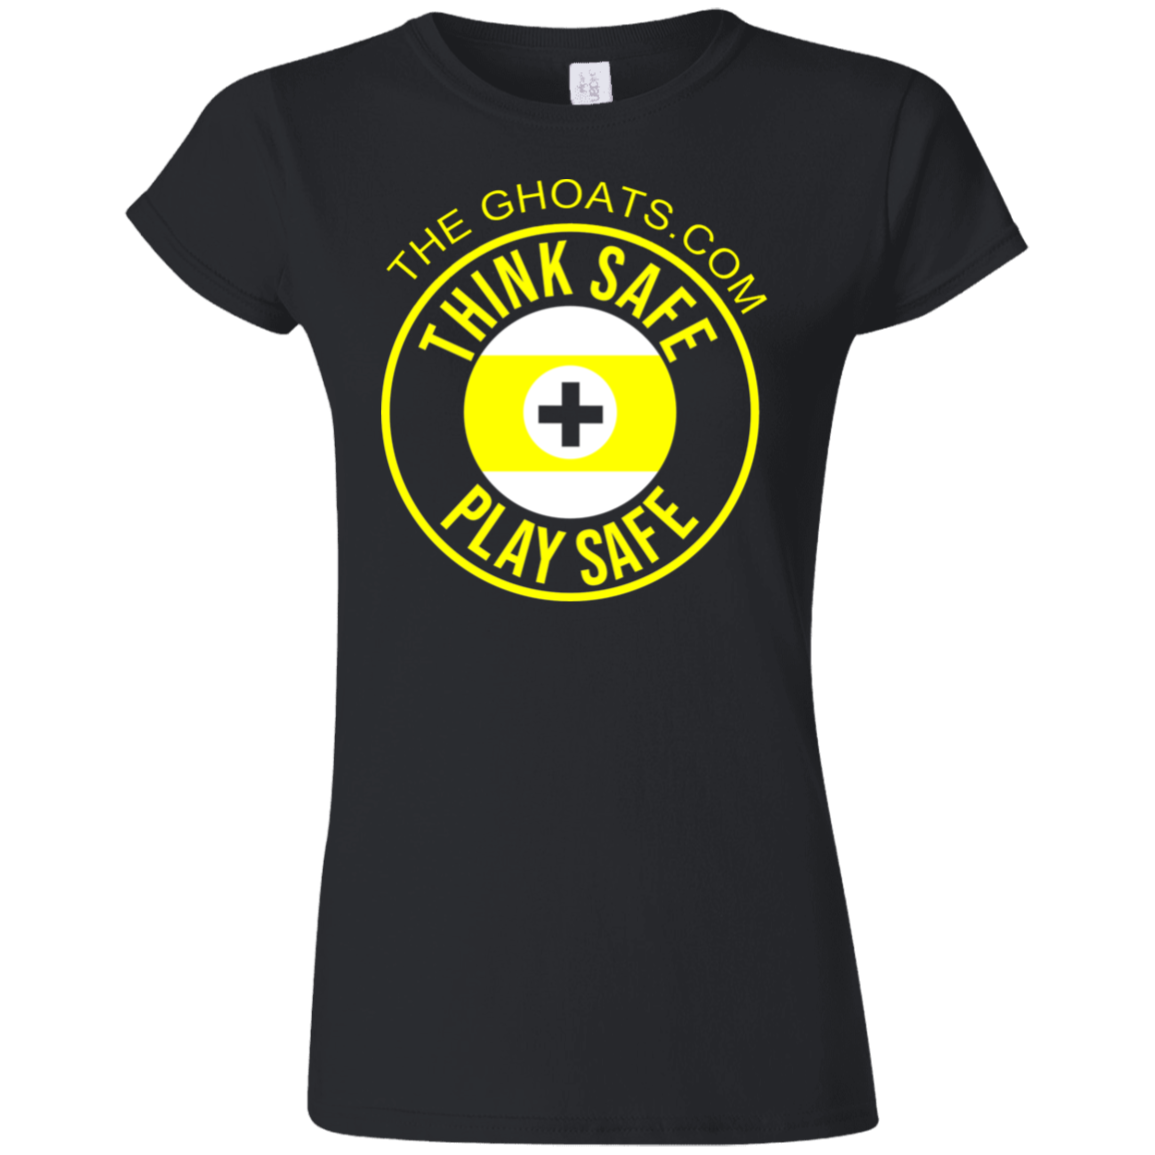 The GHOATS Custom Design. #31 Think Safe. Play Safe. Ultra Soft Style Ladies' T-Shirt